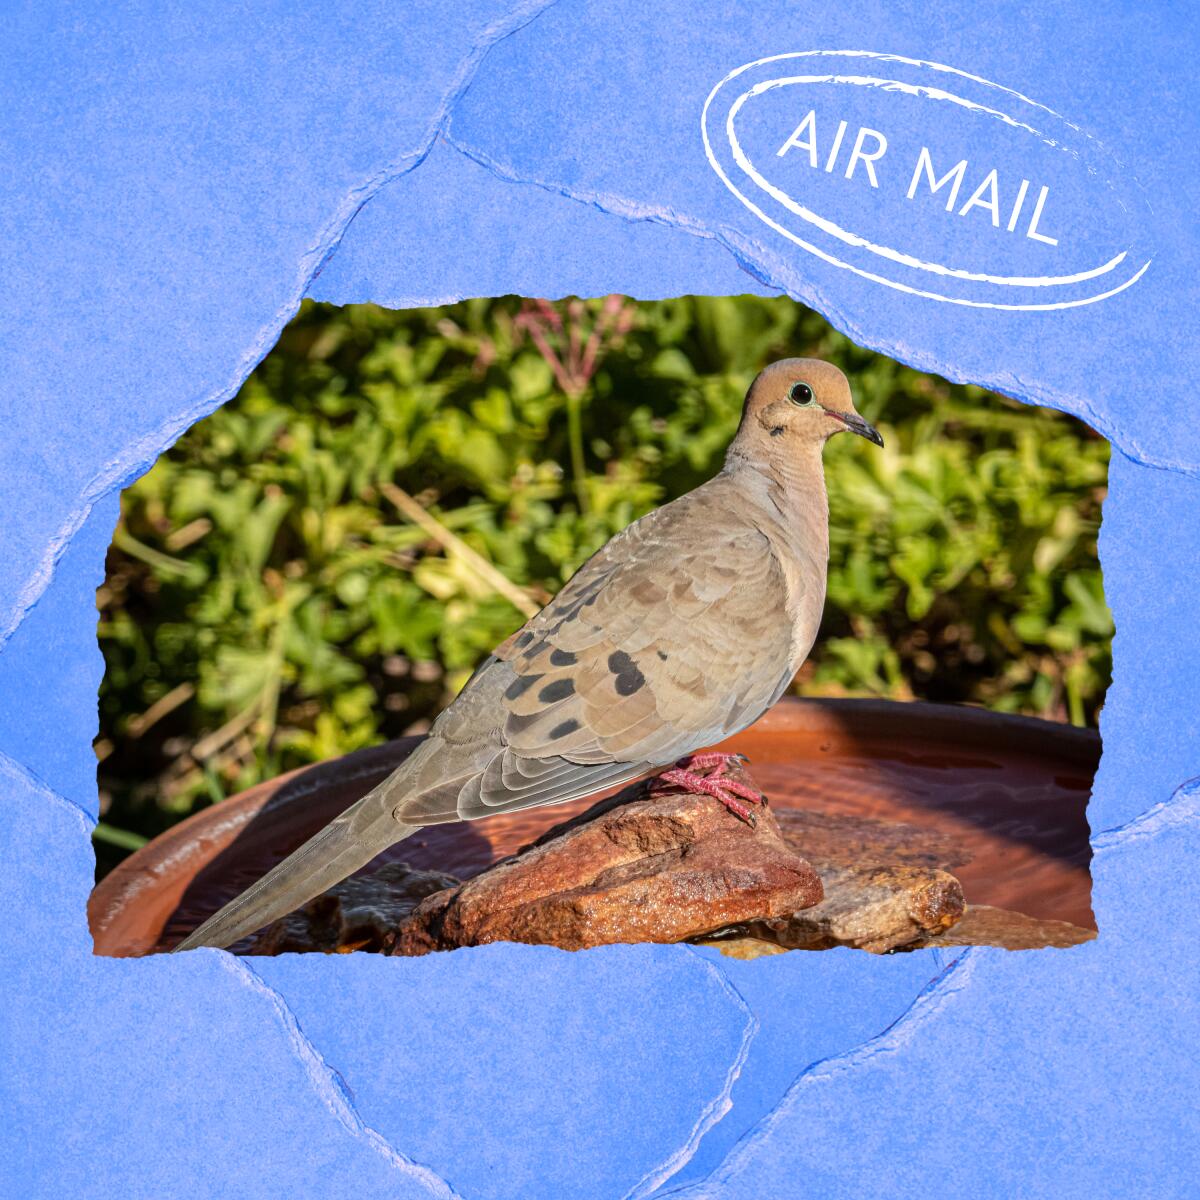 A mourning dove on an illustrated background with an "Air Mail" stamp